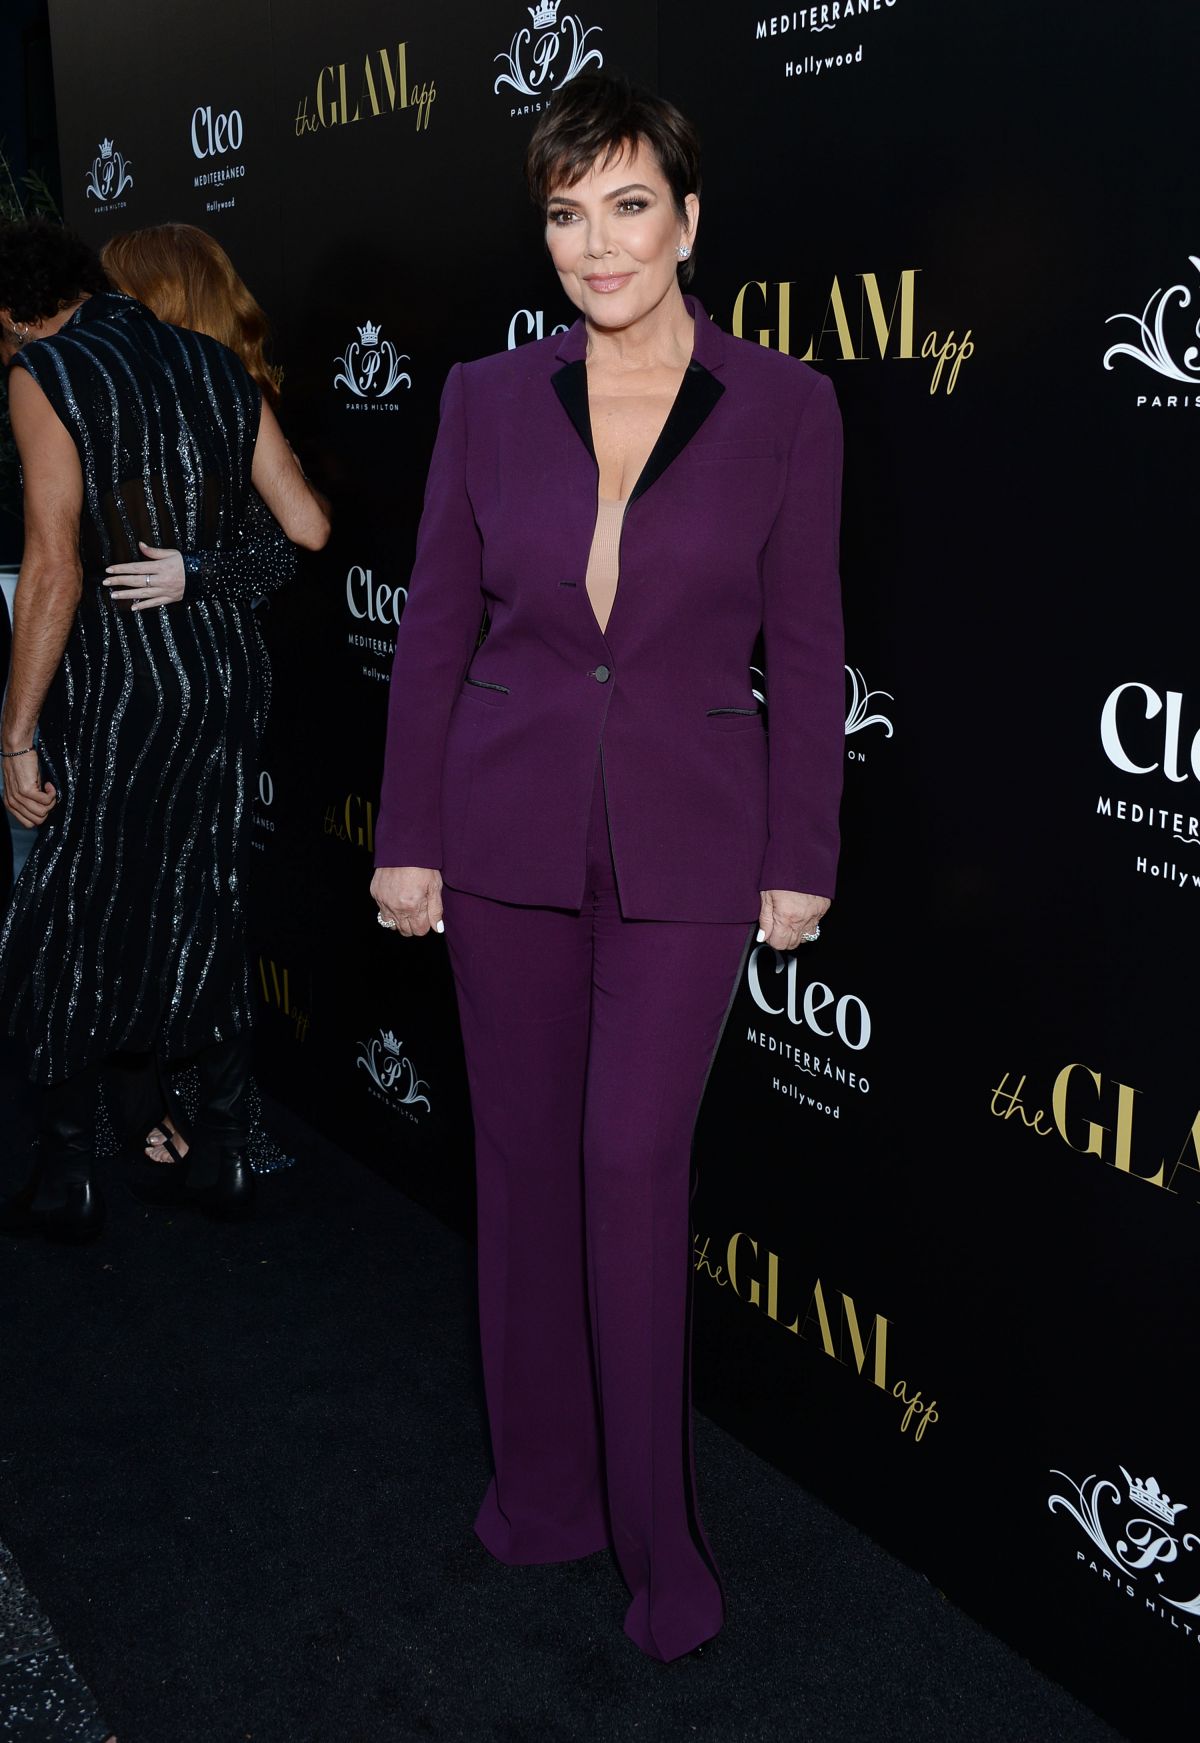 kris-jenner-at-the-glam-app-launch-in-los-angeles-06-19-2019-2.jpg